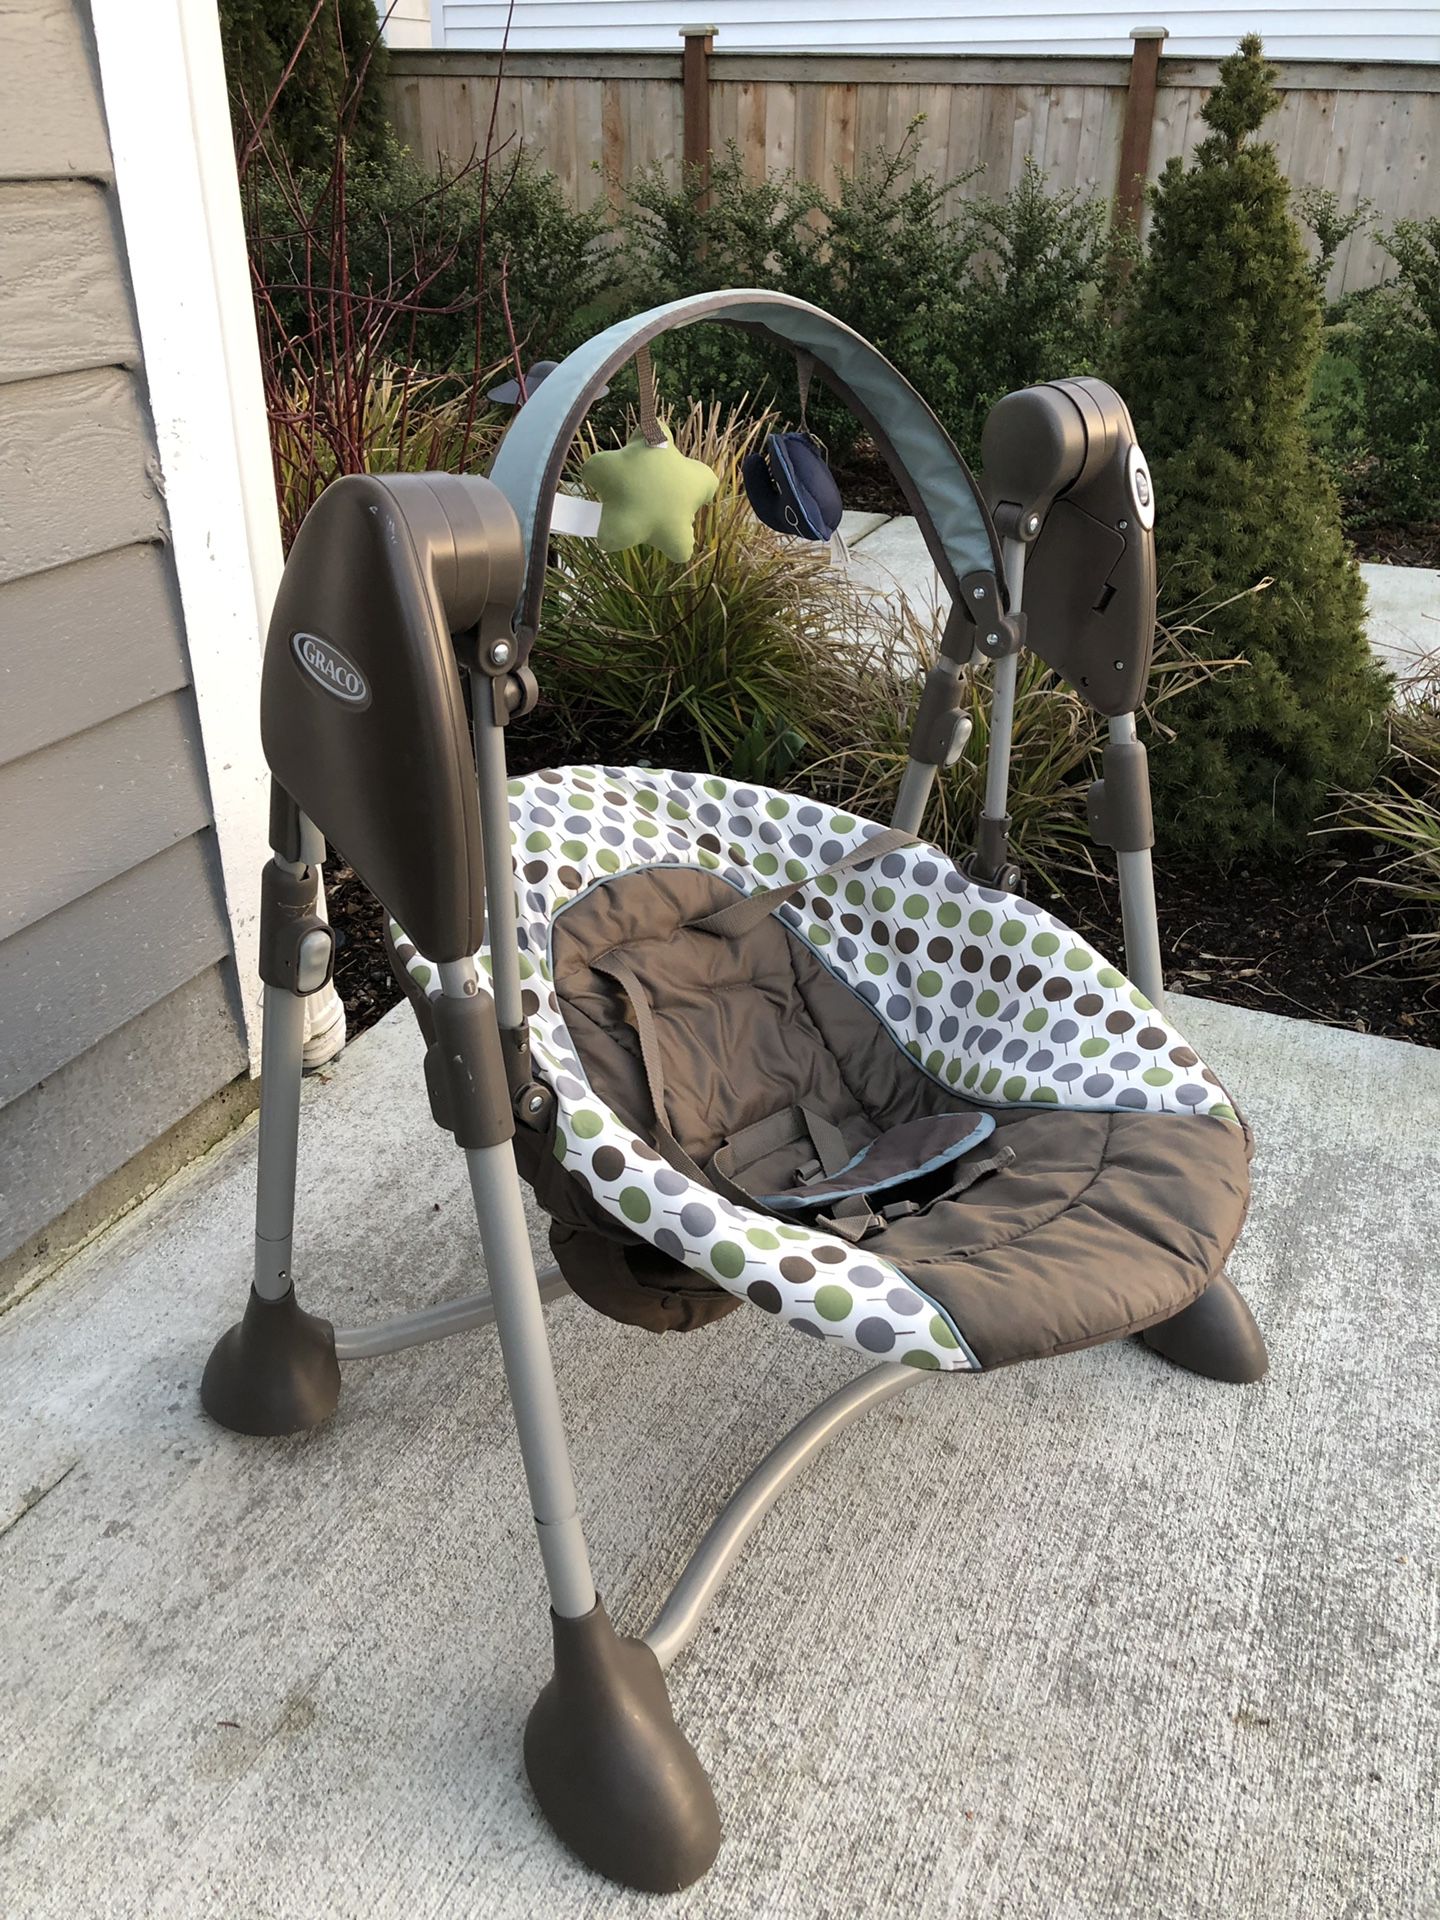 Graco Baby Swing - collapsible